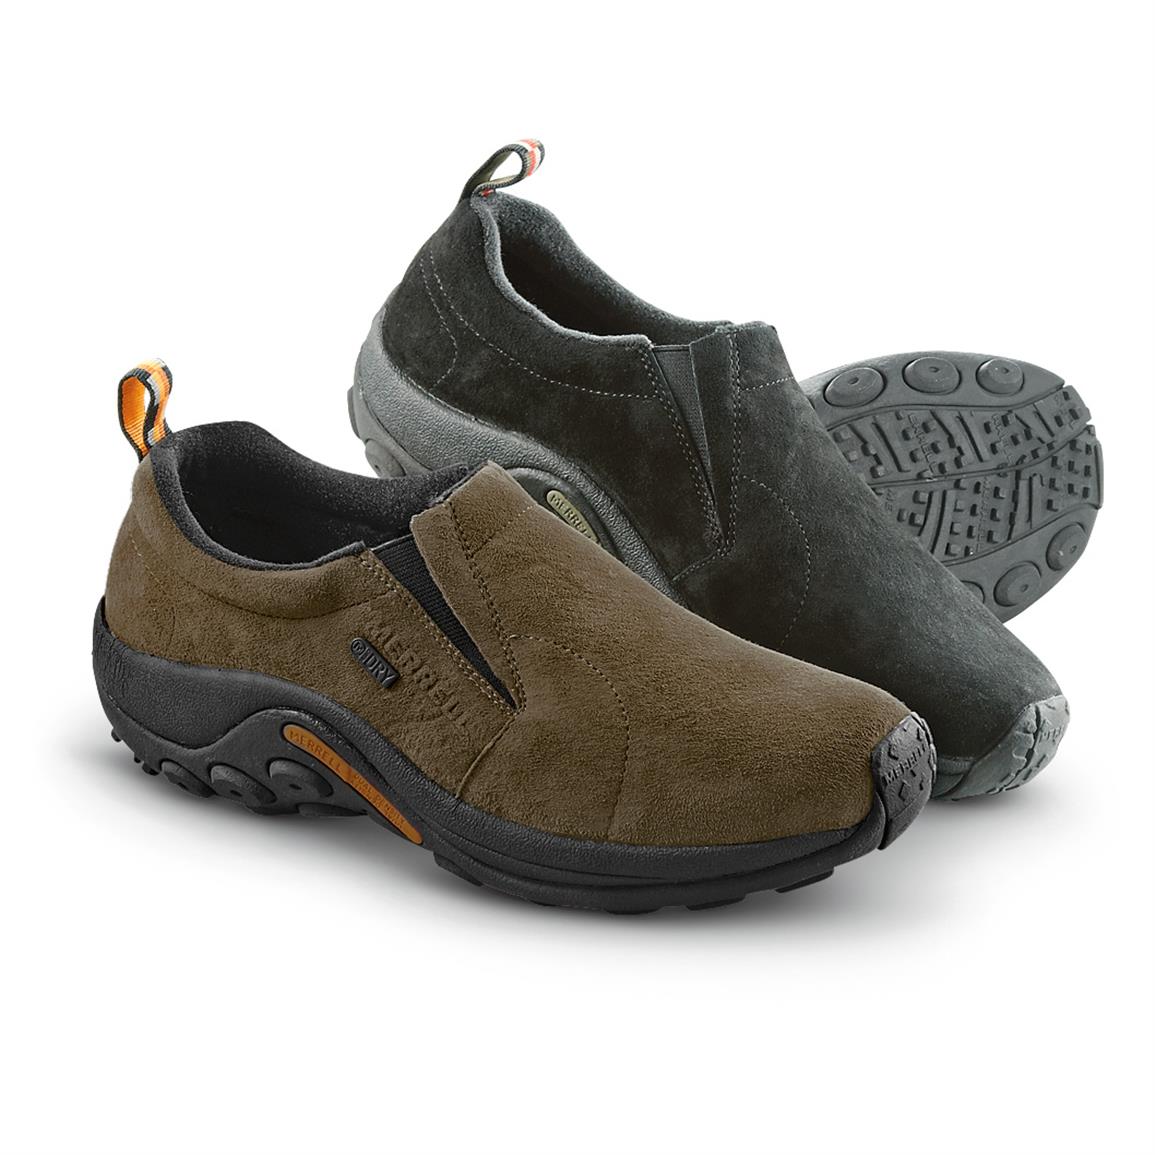 Merrell Men's Jungle Moc Waterproof Slip-On Shoes - 425150, Casual Shoes at Sportsman's Guide